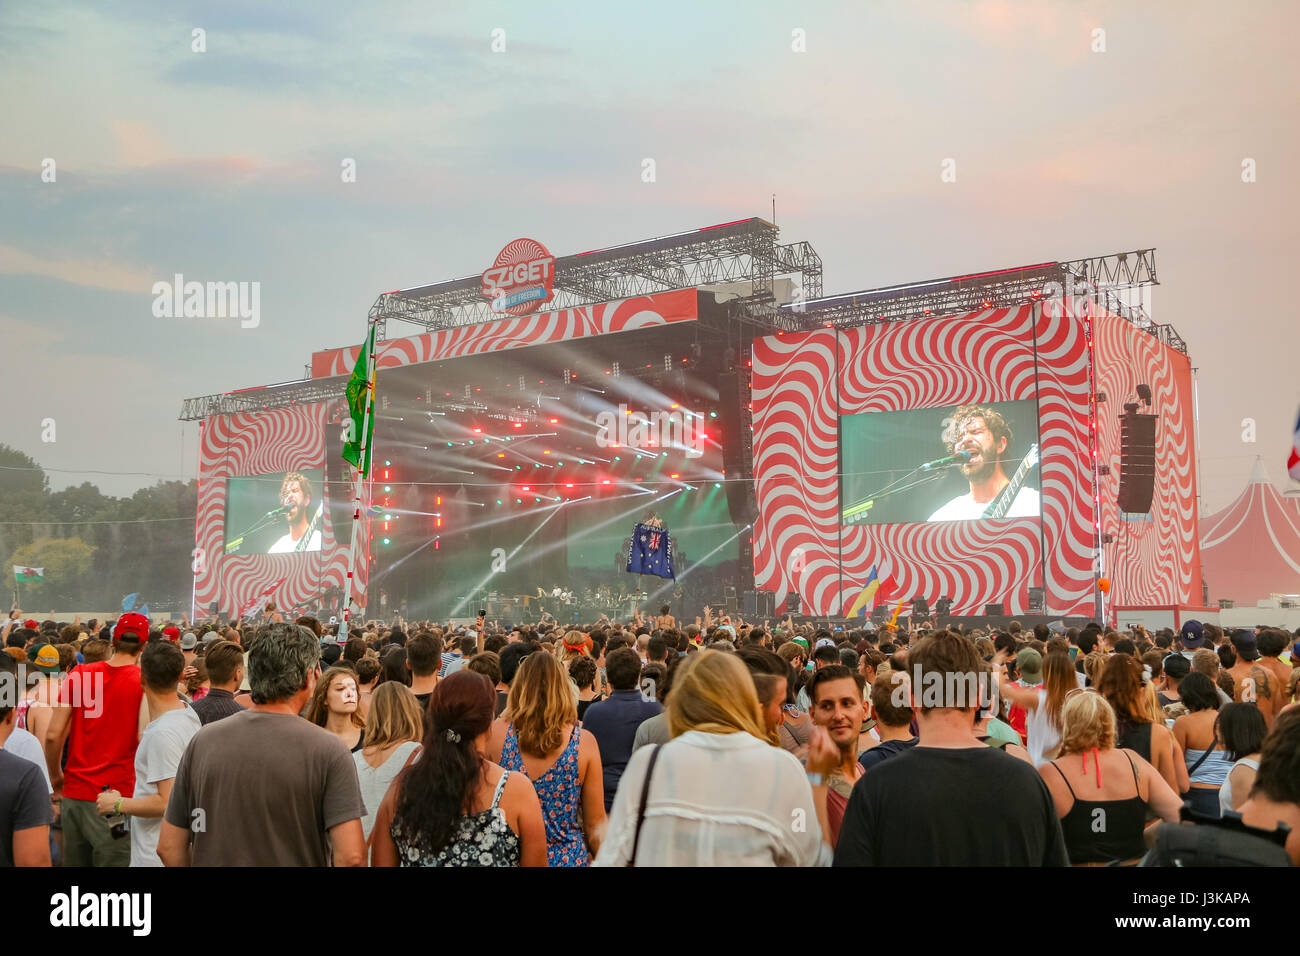 The main stage at the Sziget Festival in Budapest, Hungary Stock Photo